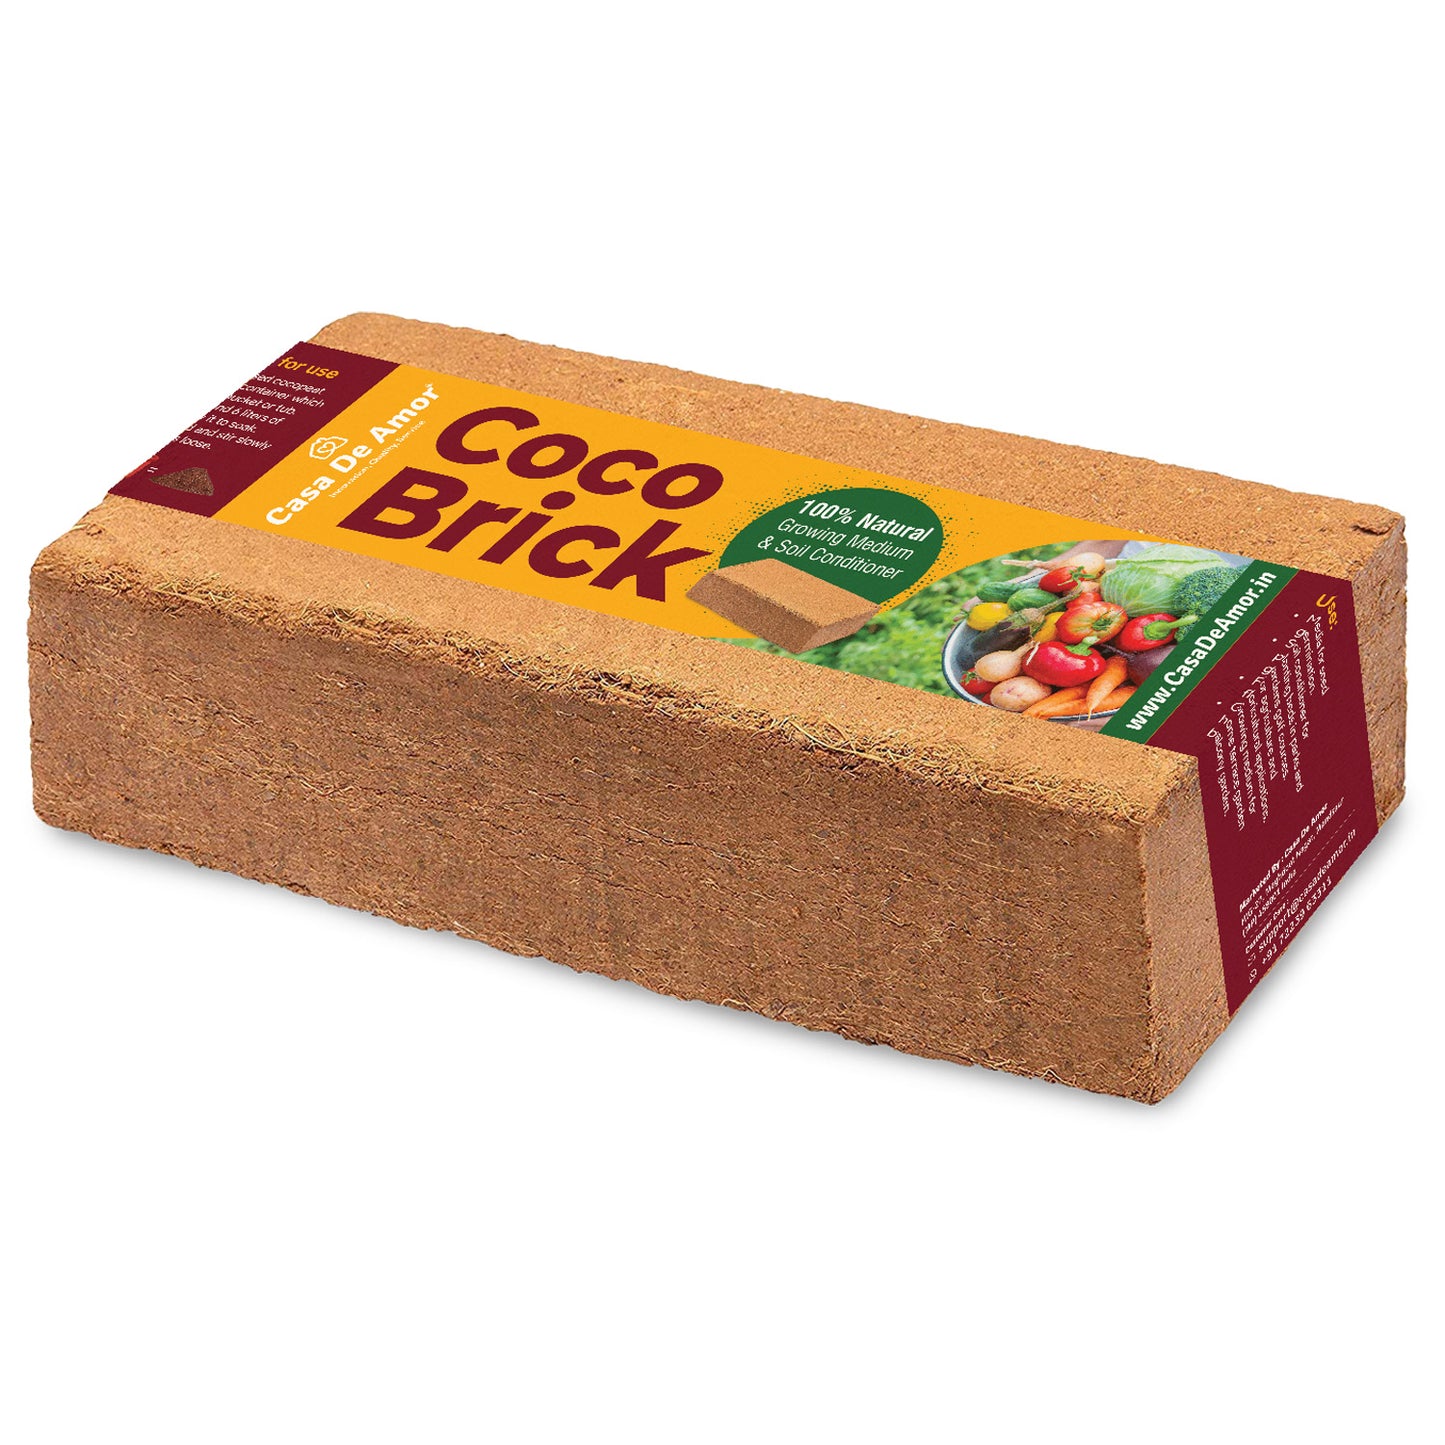 Casa De Amor Cocopeat Brick (650gm) High Water-Holding Capacity, Expands to 4kg Powder